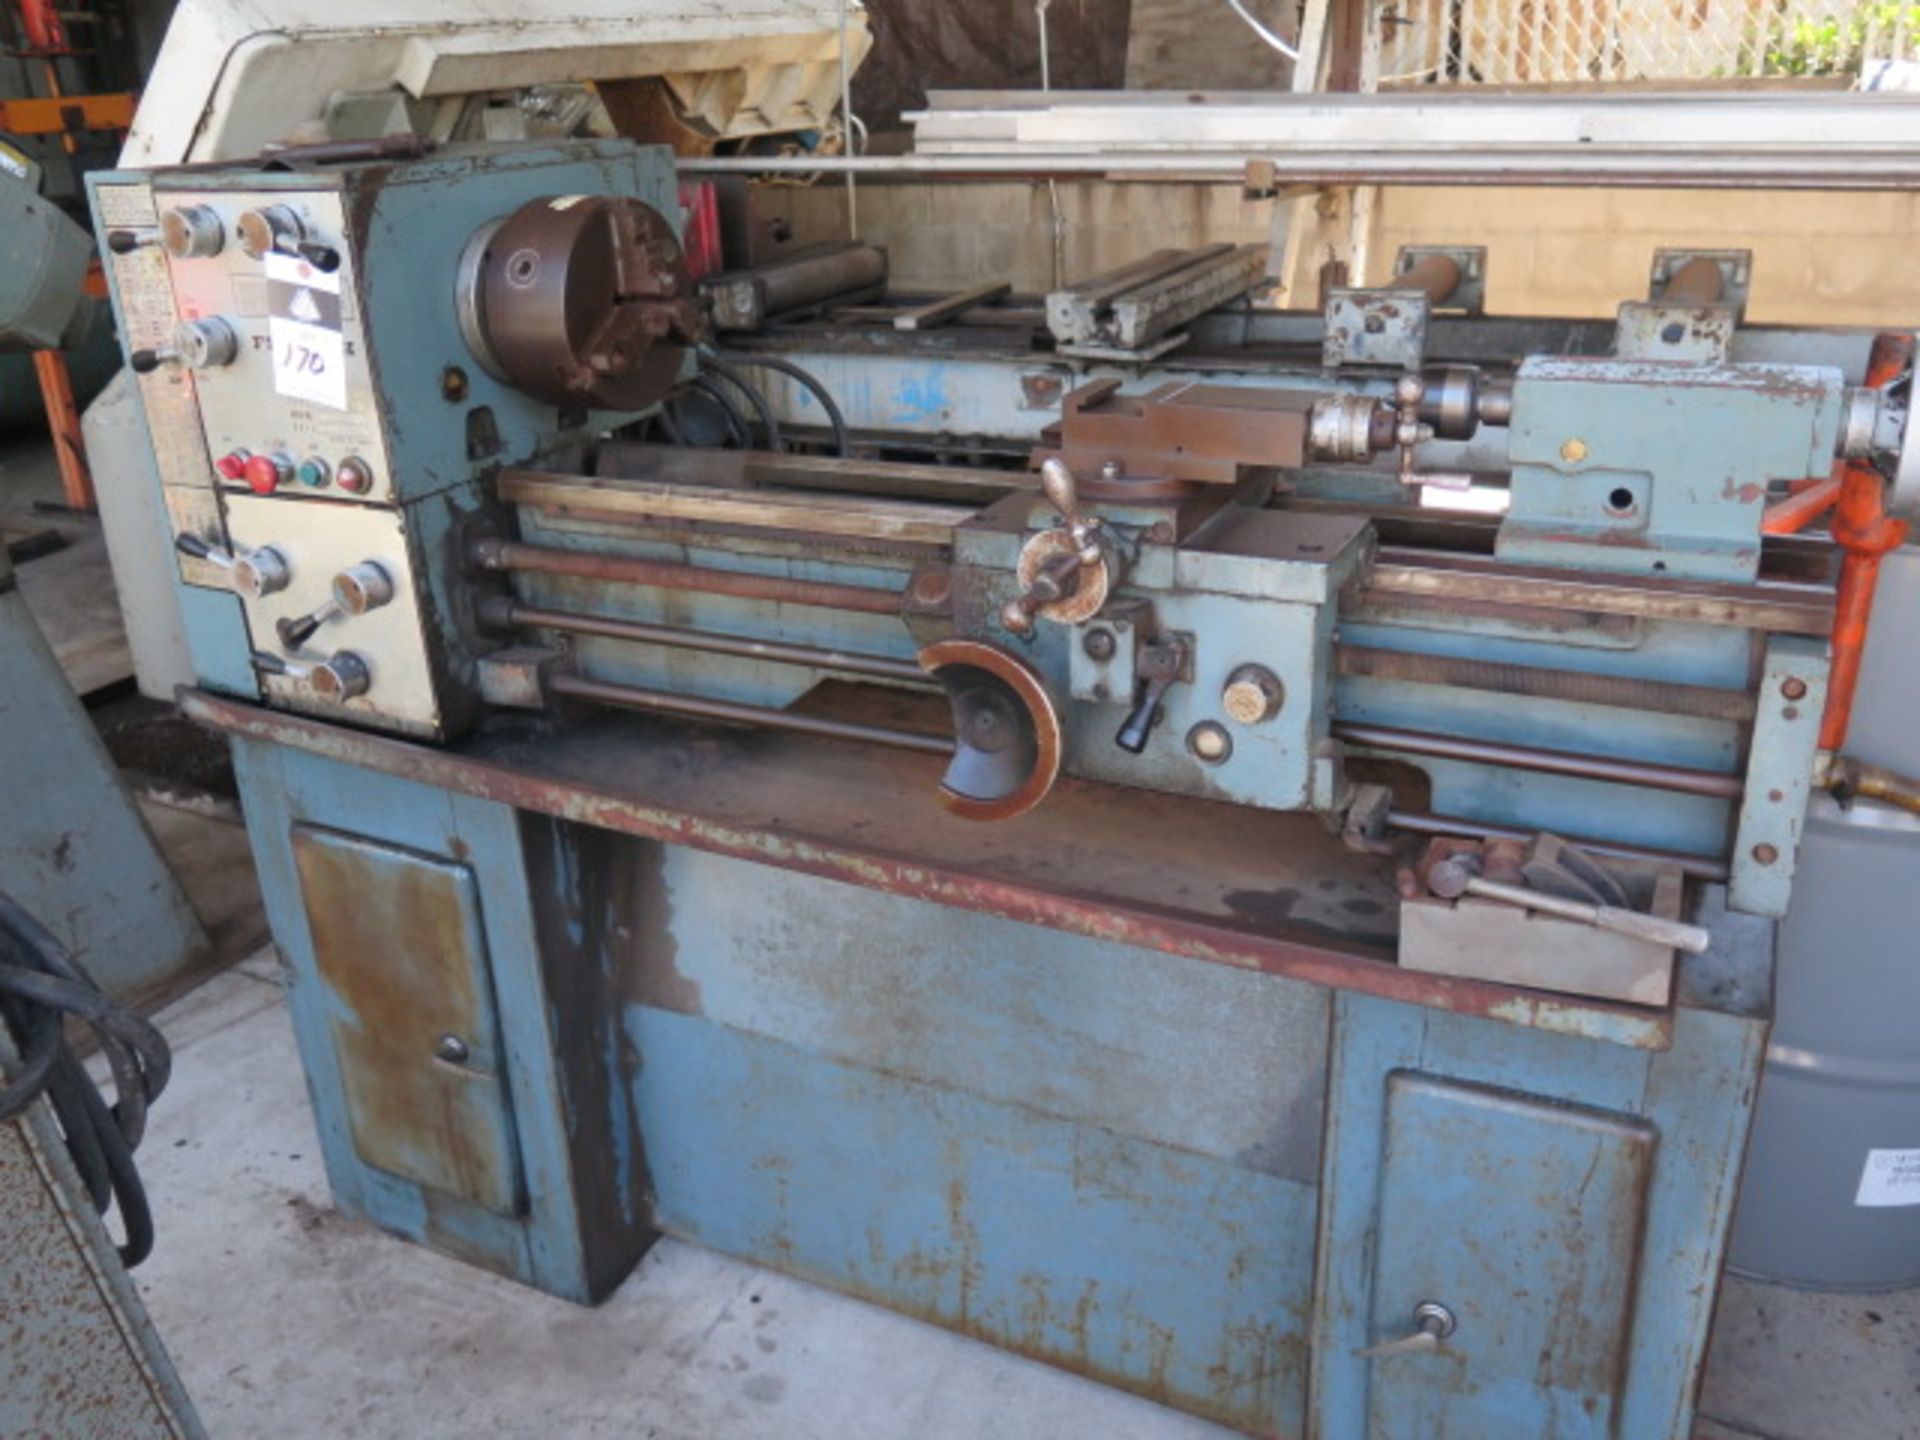 Frejoth FI-900 AE/G Lathe s/n 7334 w/ Inch/mm Threading, Tailstock (SOLD AS-IS – NO WARRANTY) - Image 2 of 12